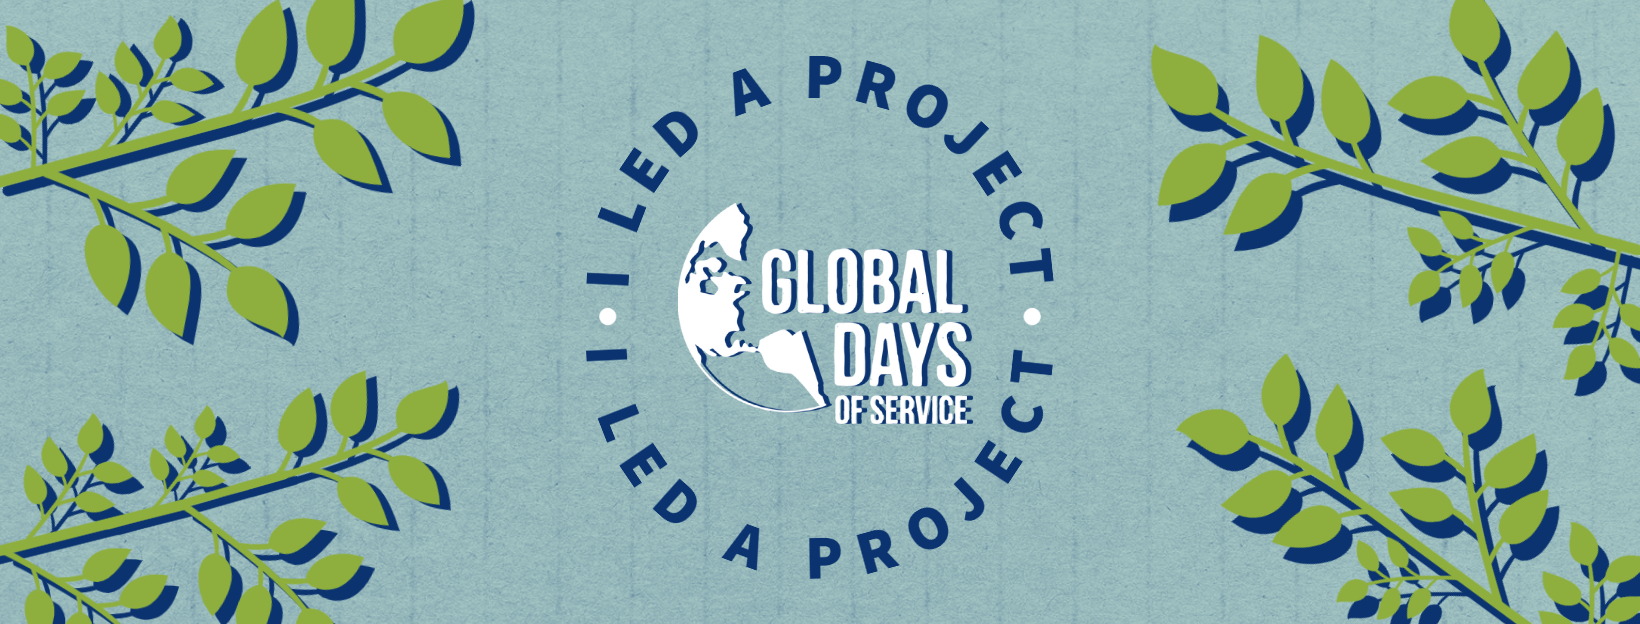 Global Days of Service cover image for Facebook profile for project leaders 